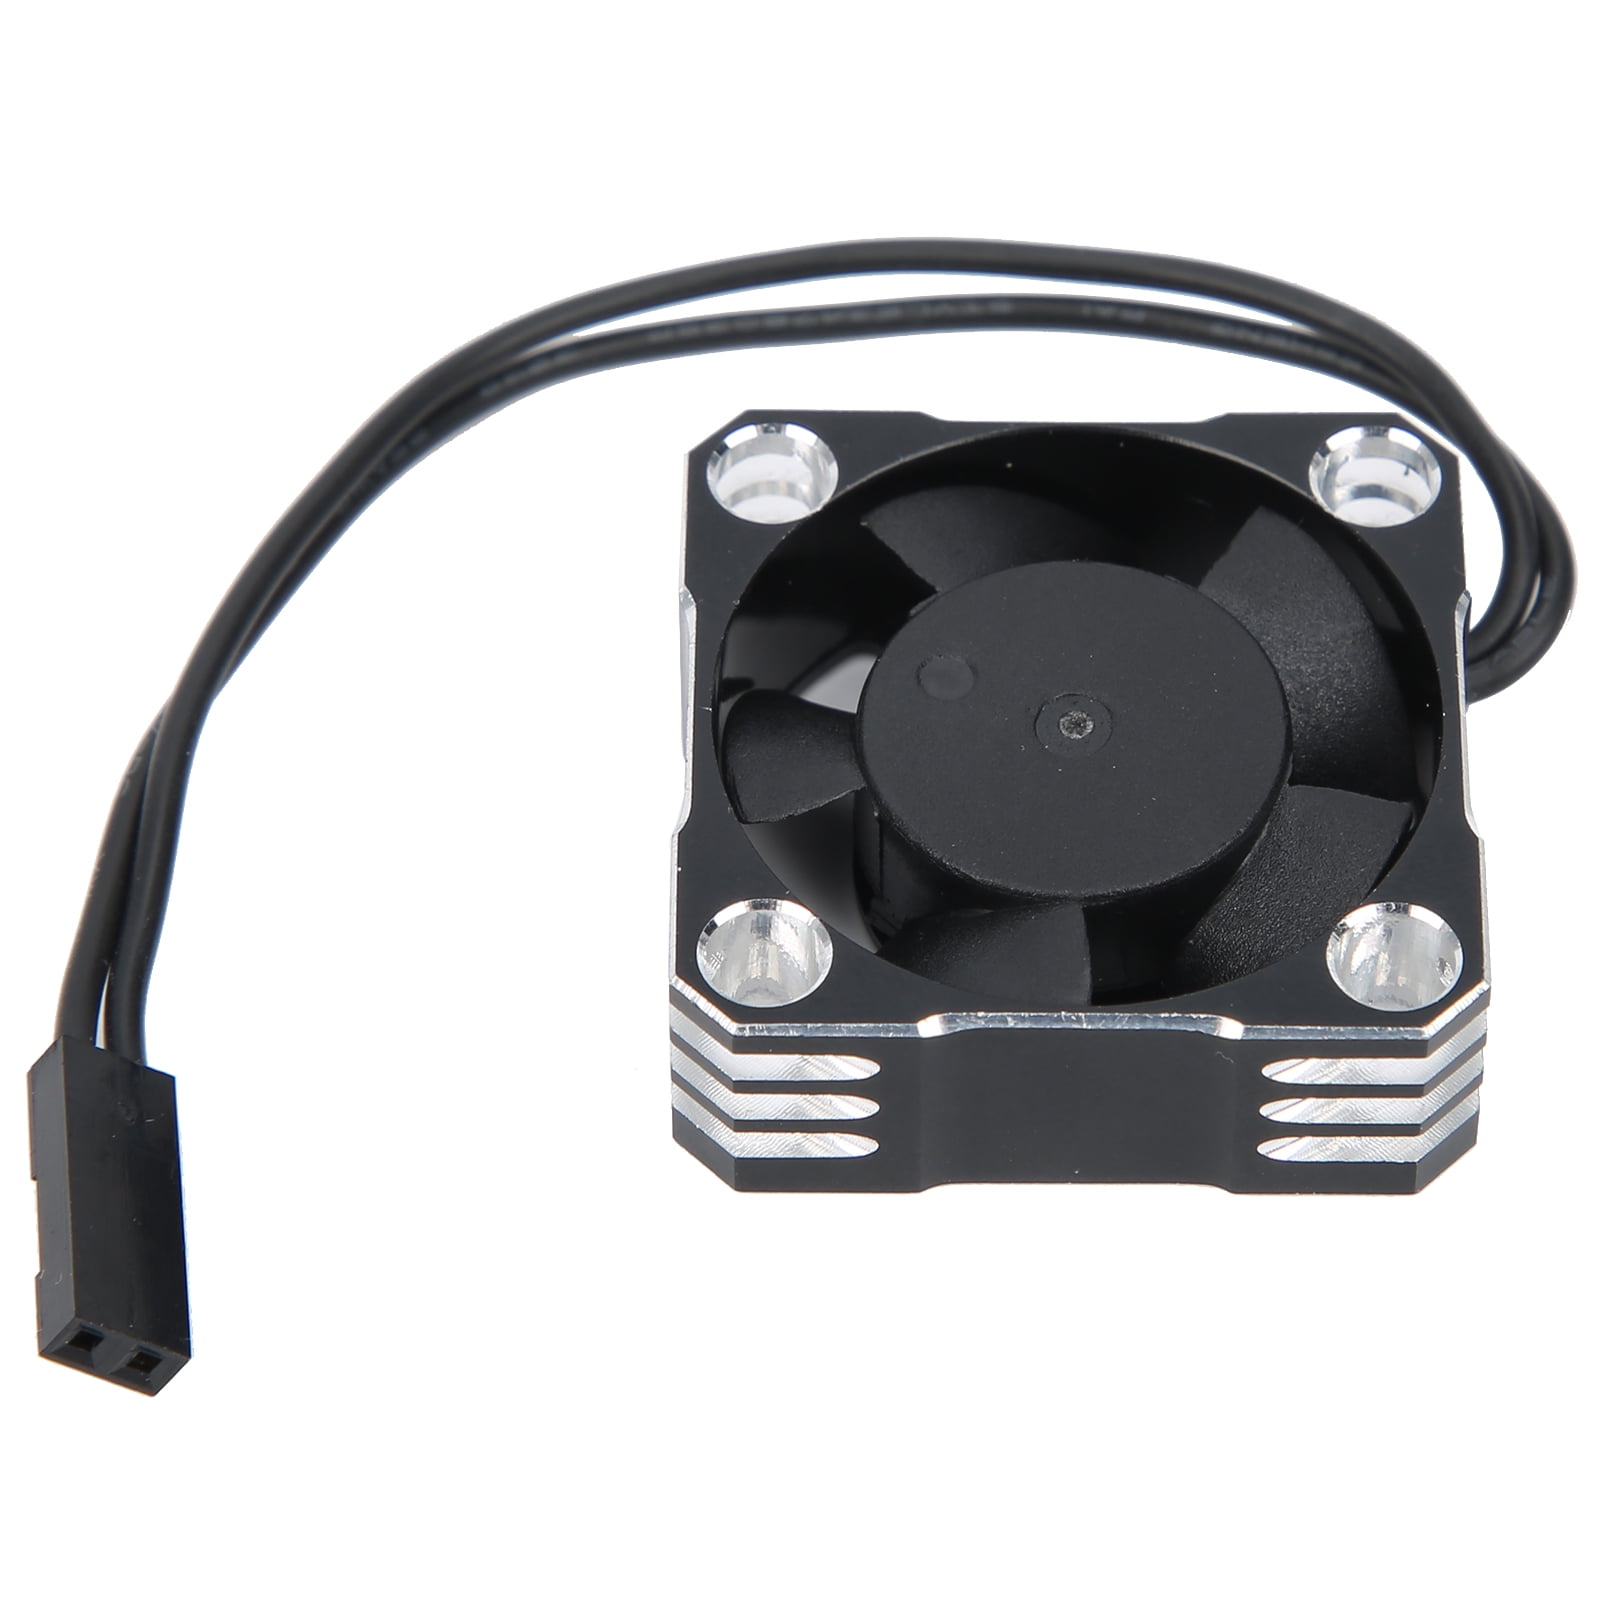 Small Size Heat Dissipation Easy to Install and Stable Esc Cooling Fan for 1/10 and 1/8 for Rc Esc Motor Rc Cooling Fan